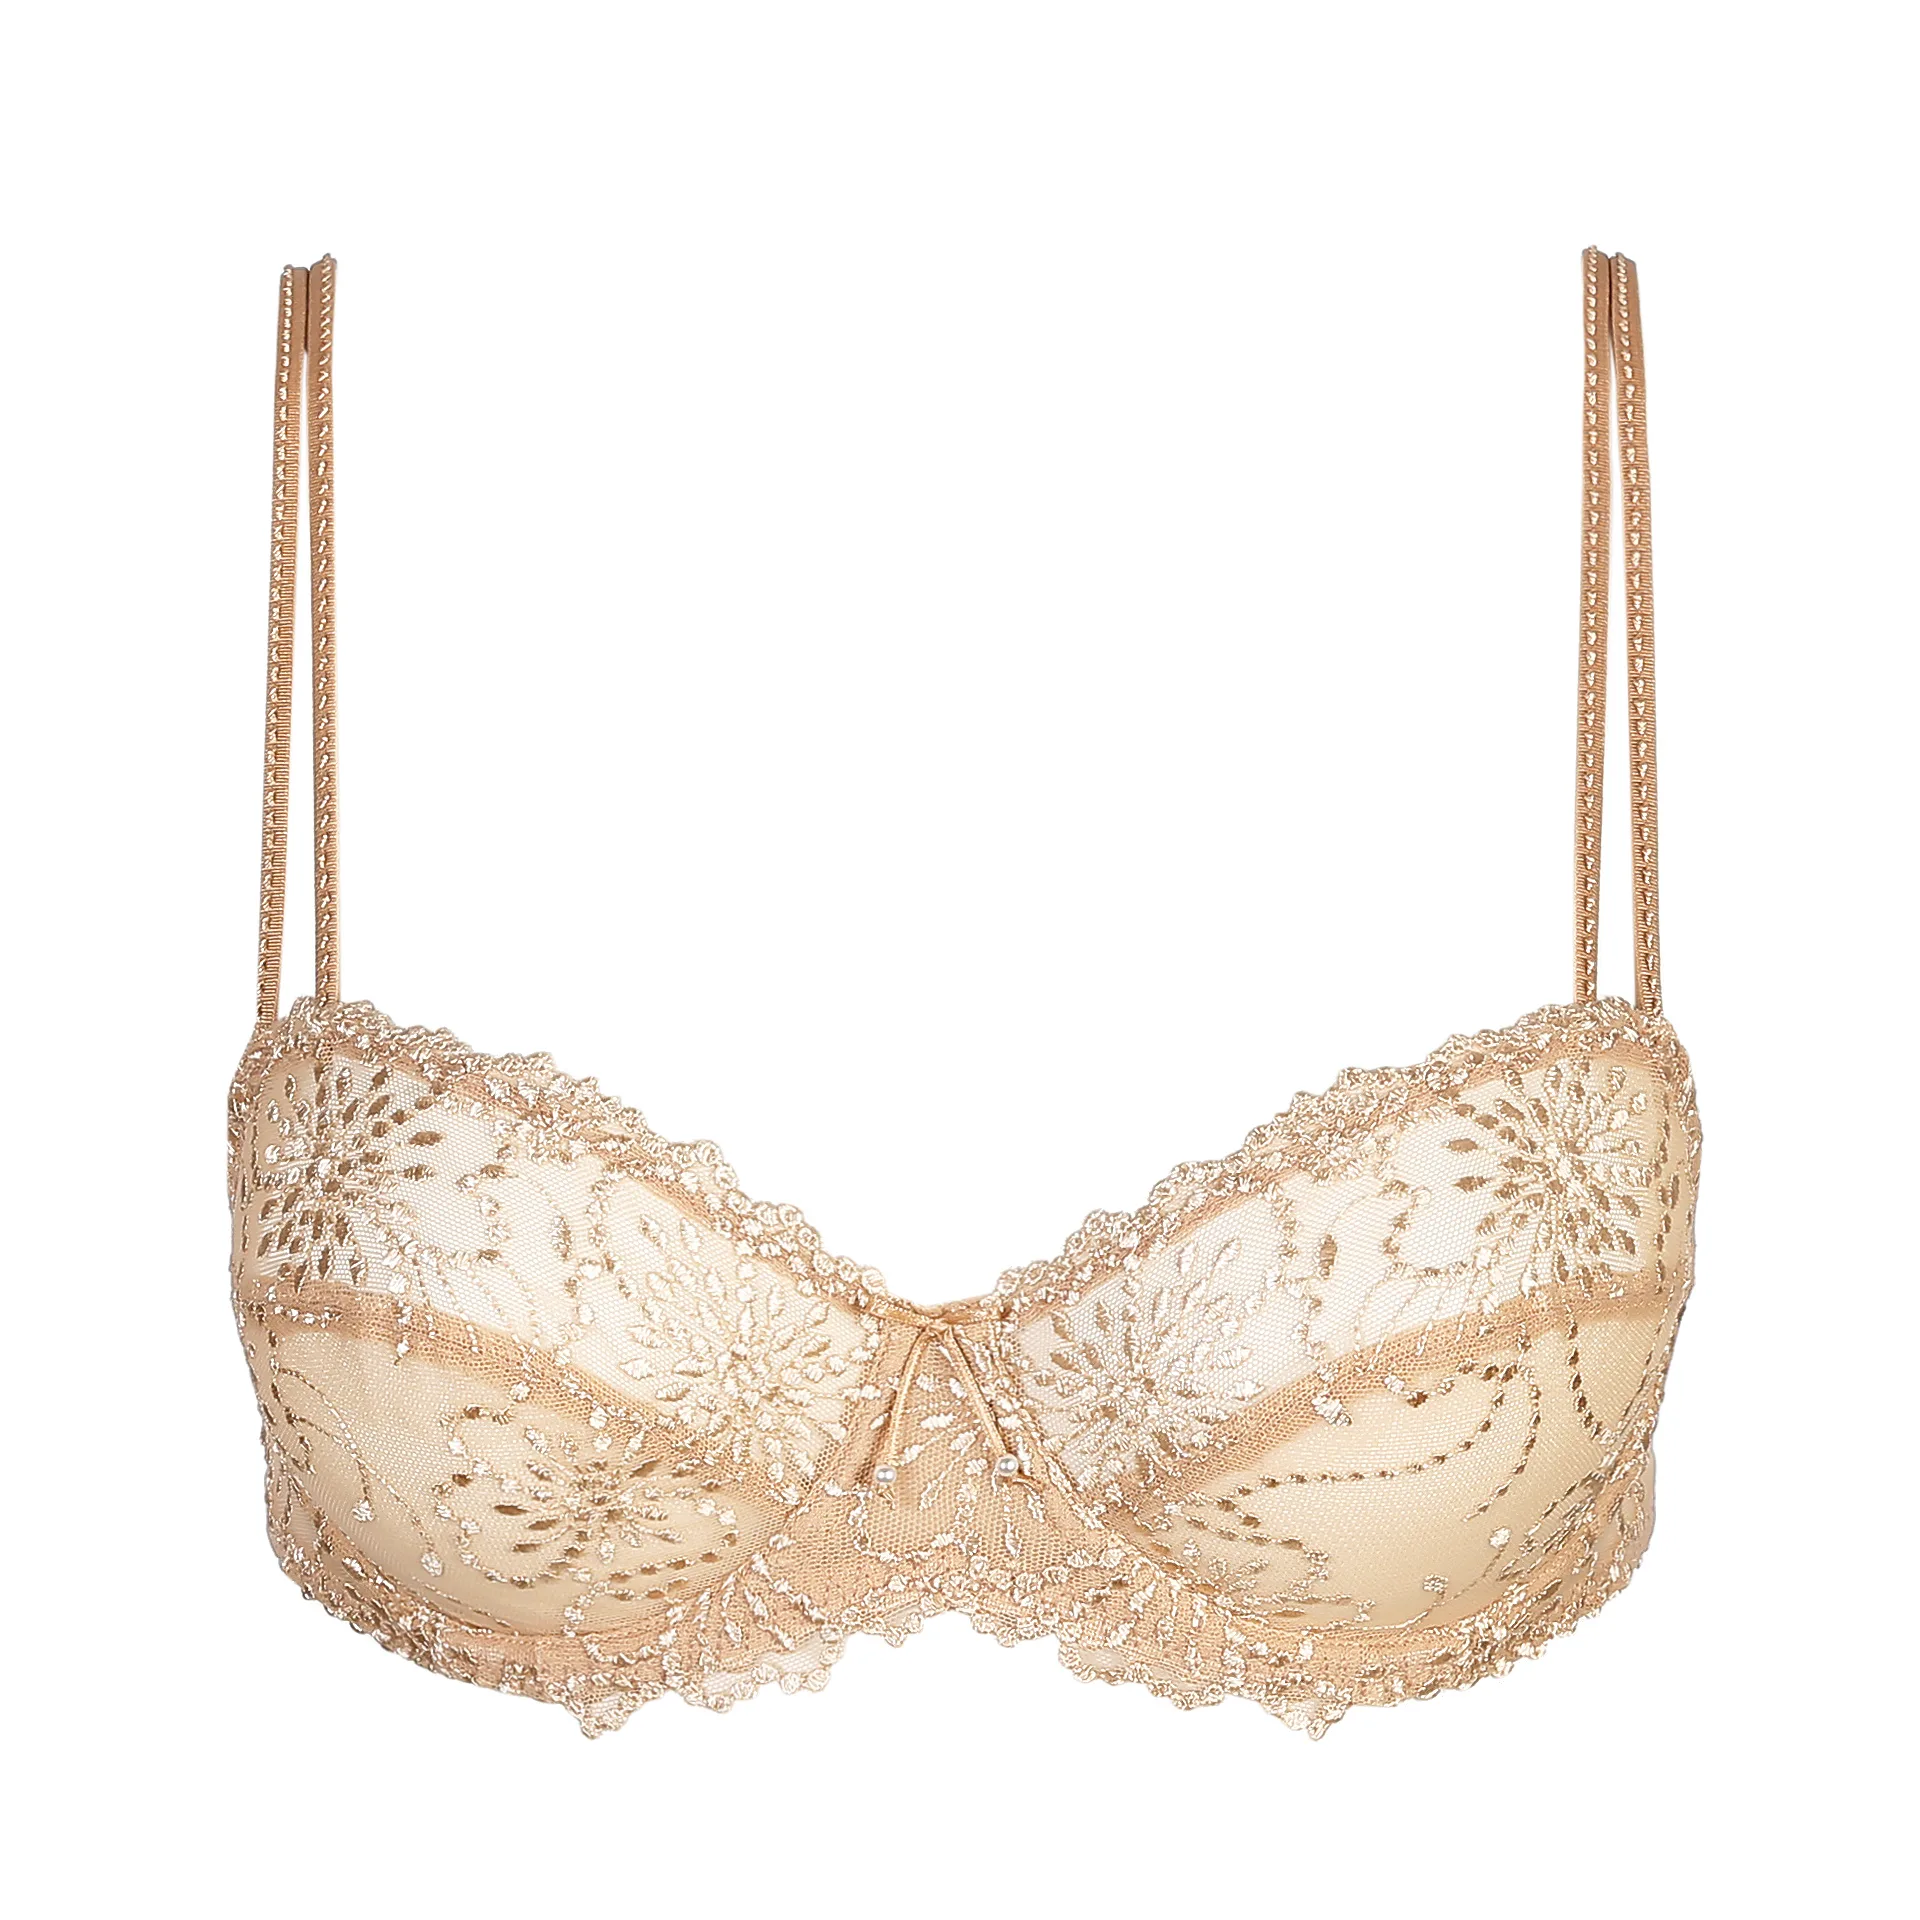 Marie Jo Jane Non-Moulded Balcony Bra with horizontal seam in Dune B-D Cup